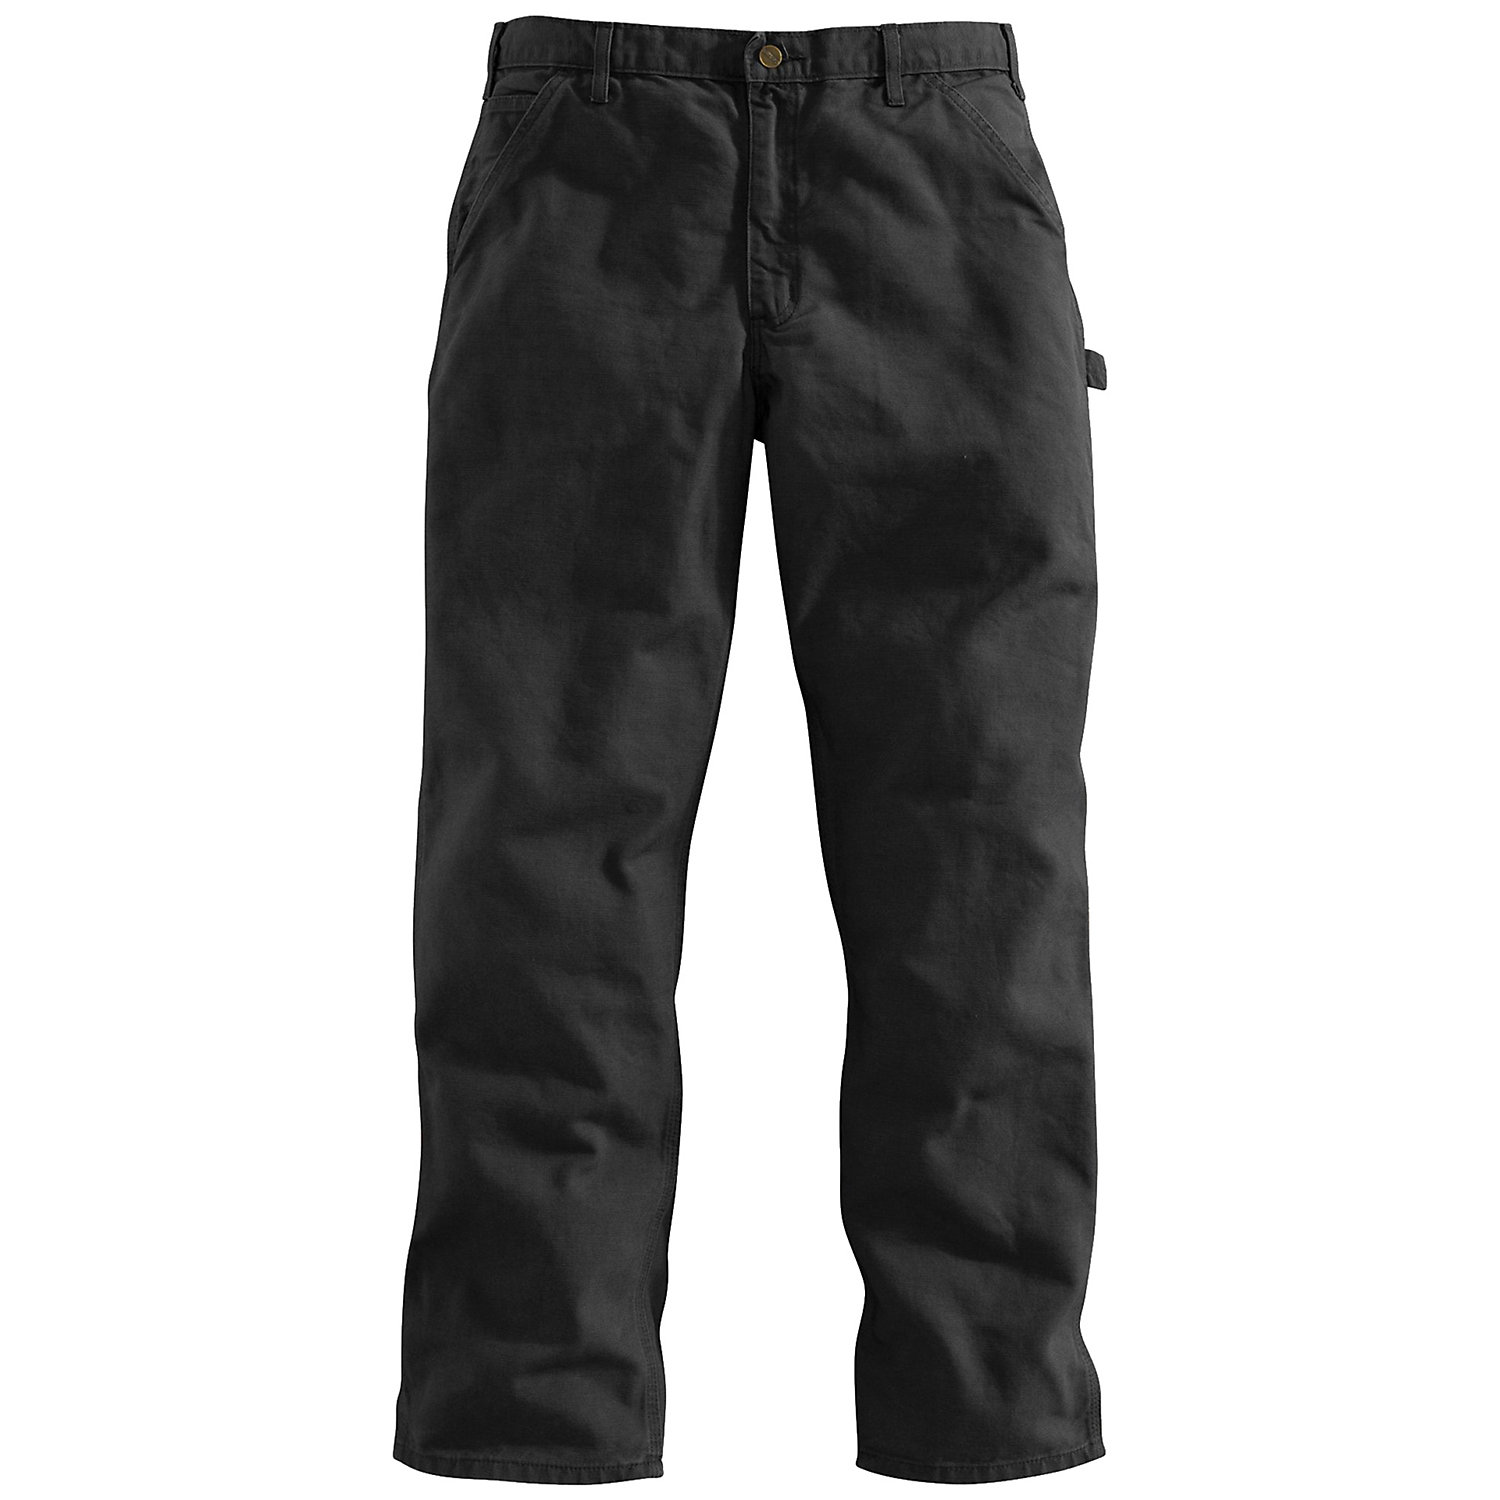 Carhartt Mens Washed-Duck Work Dungaree Pant